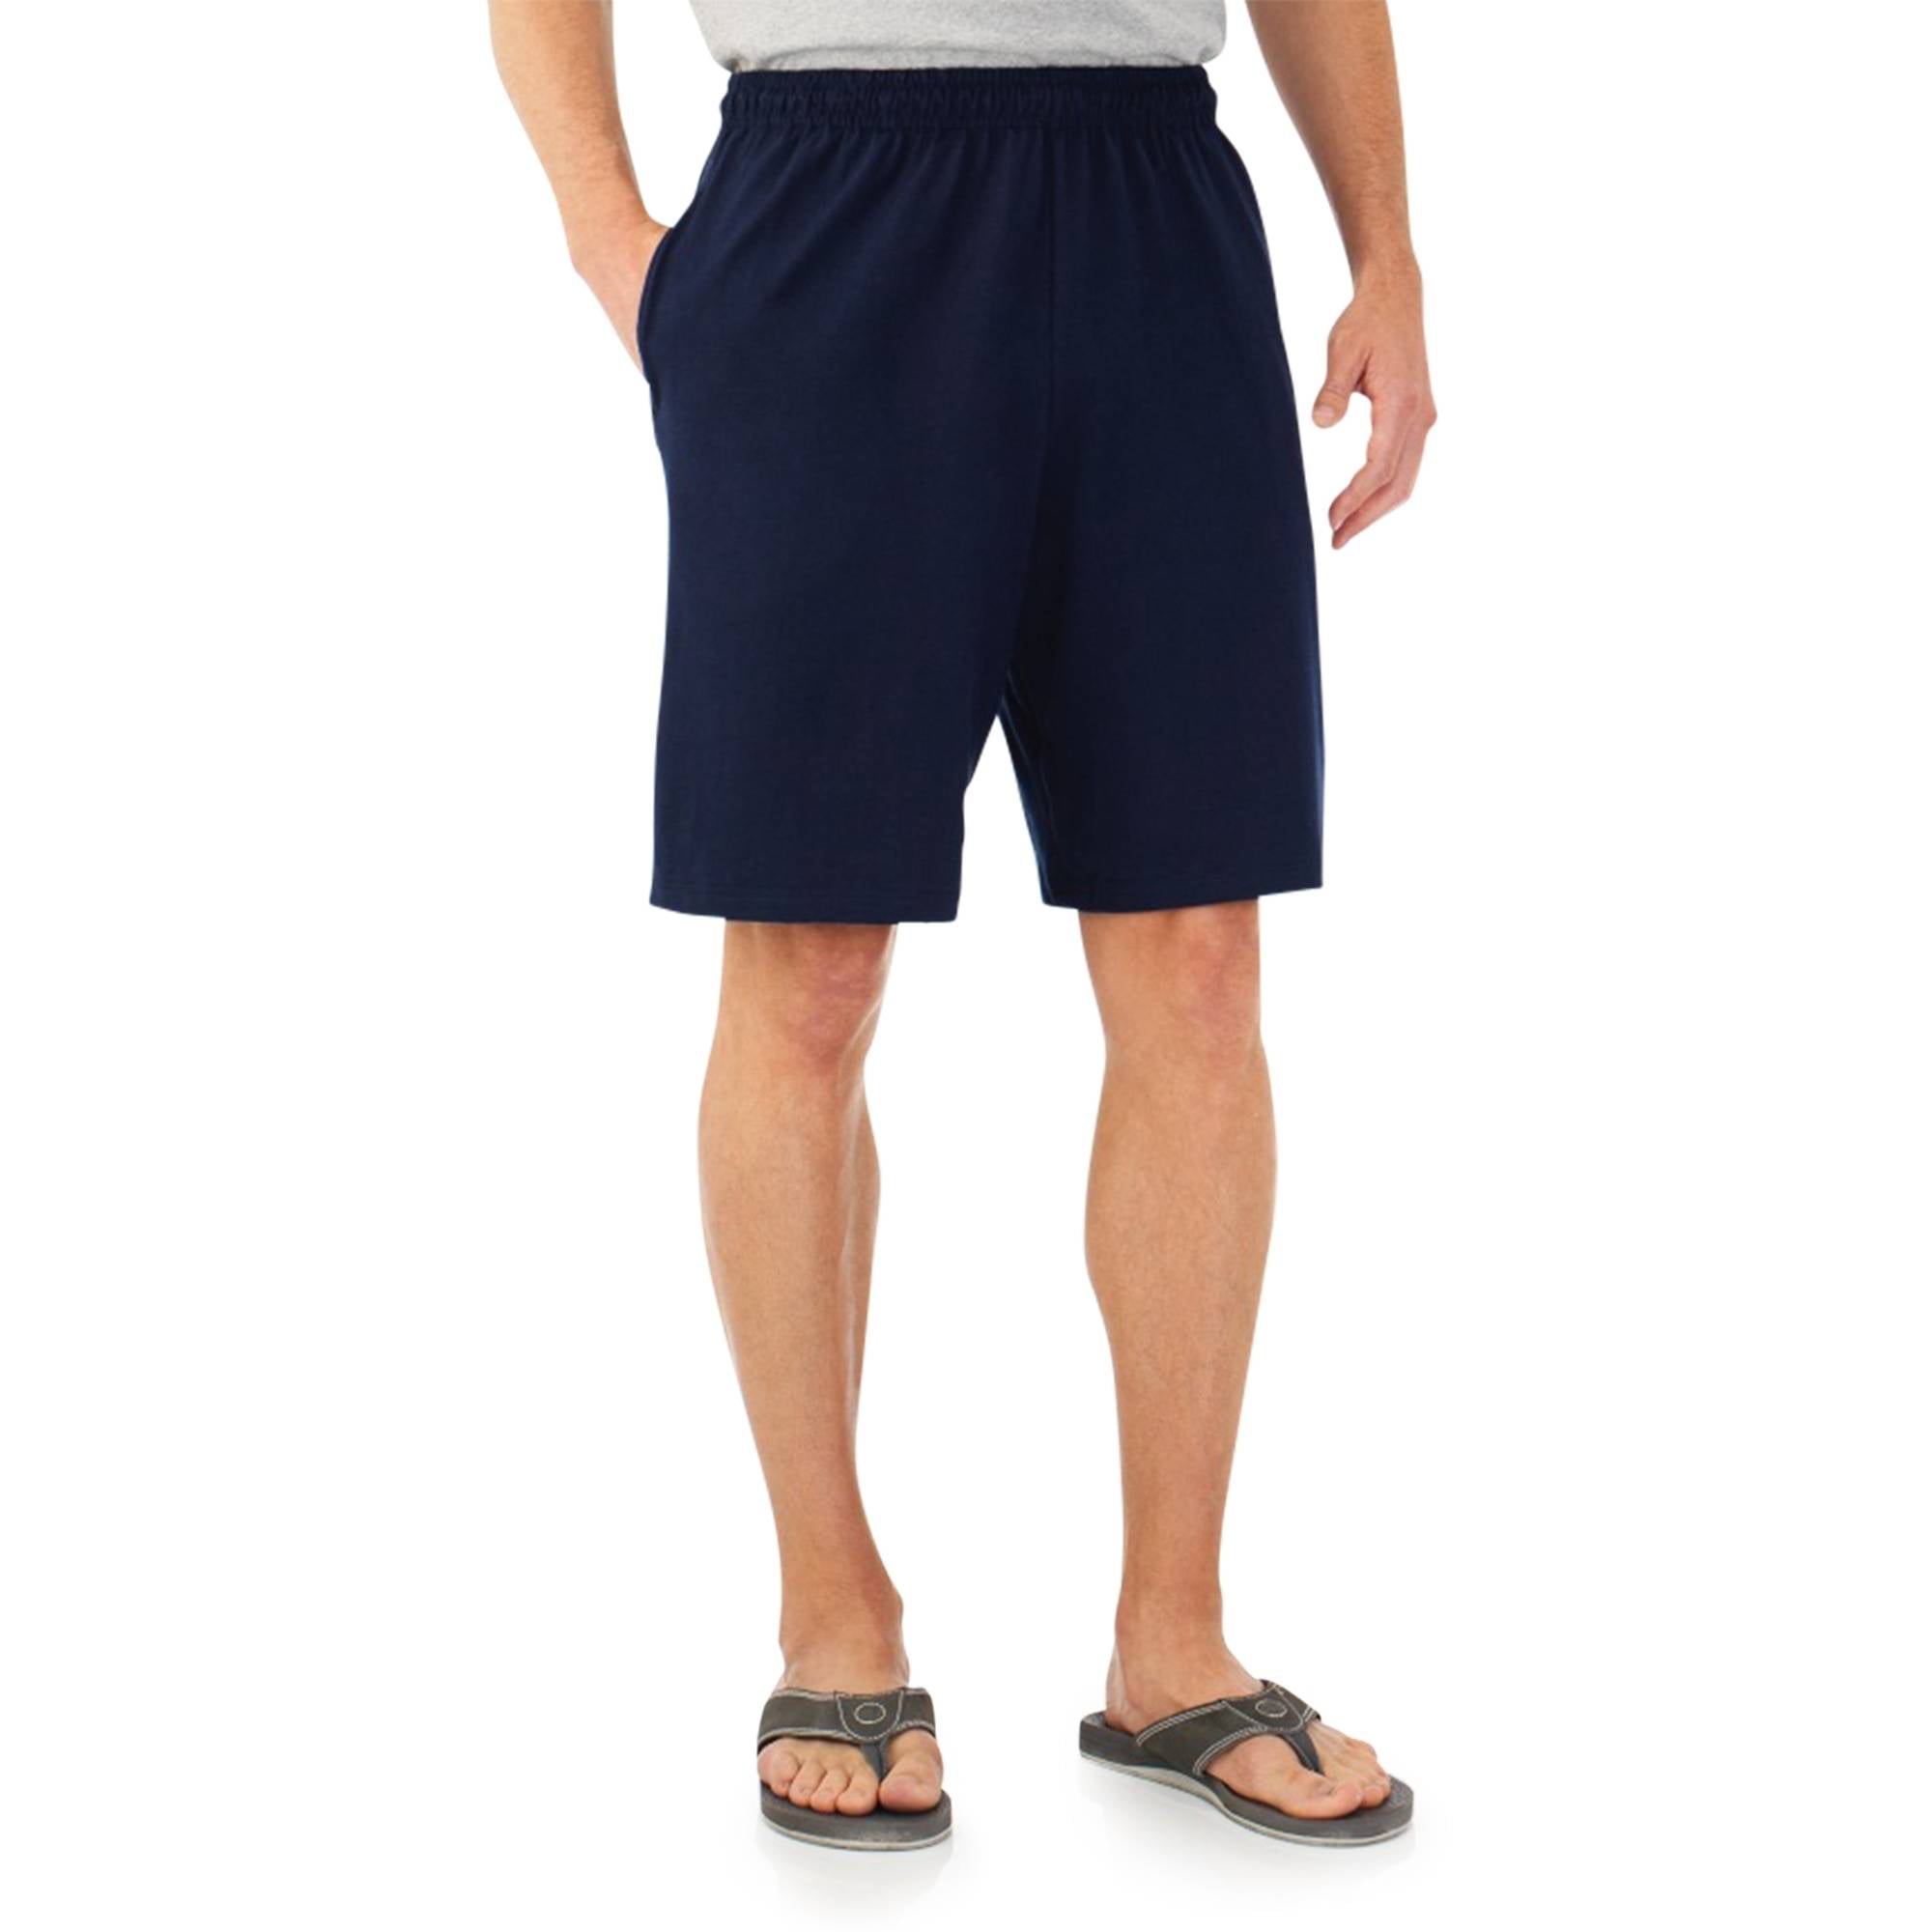 fruit of the loom men's jersey shorts